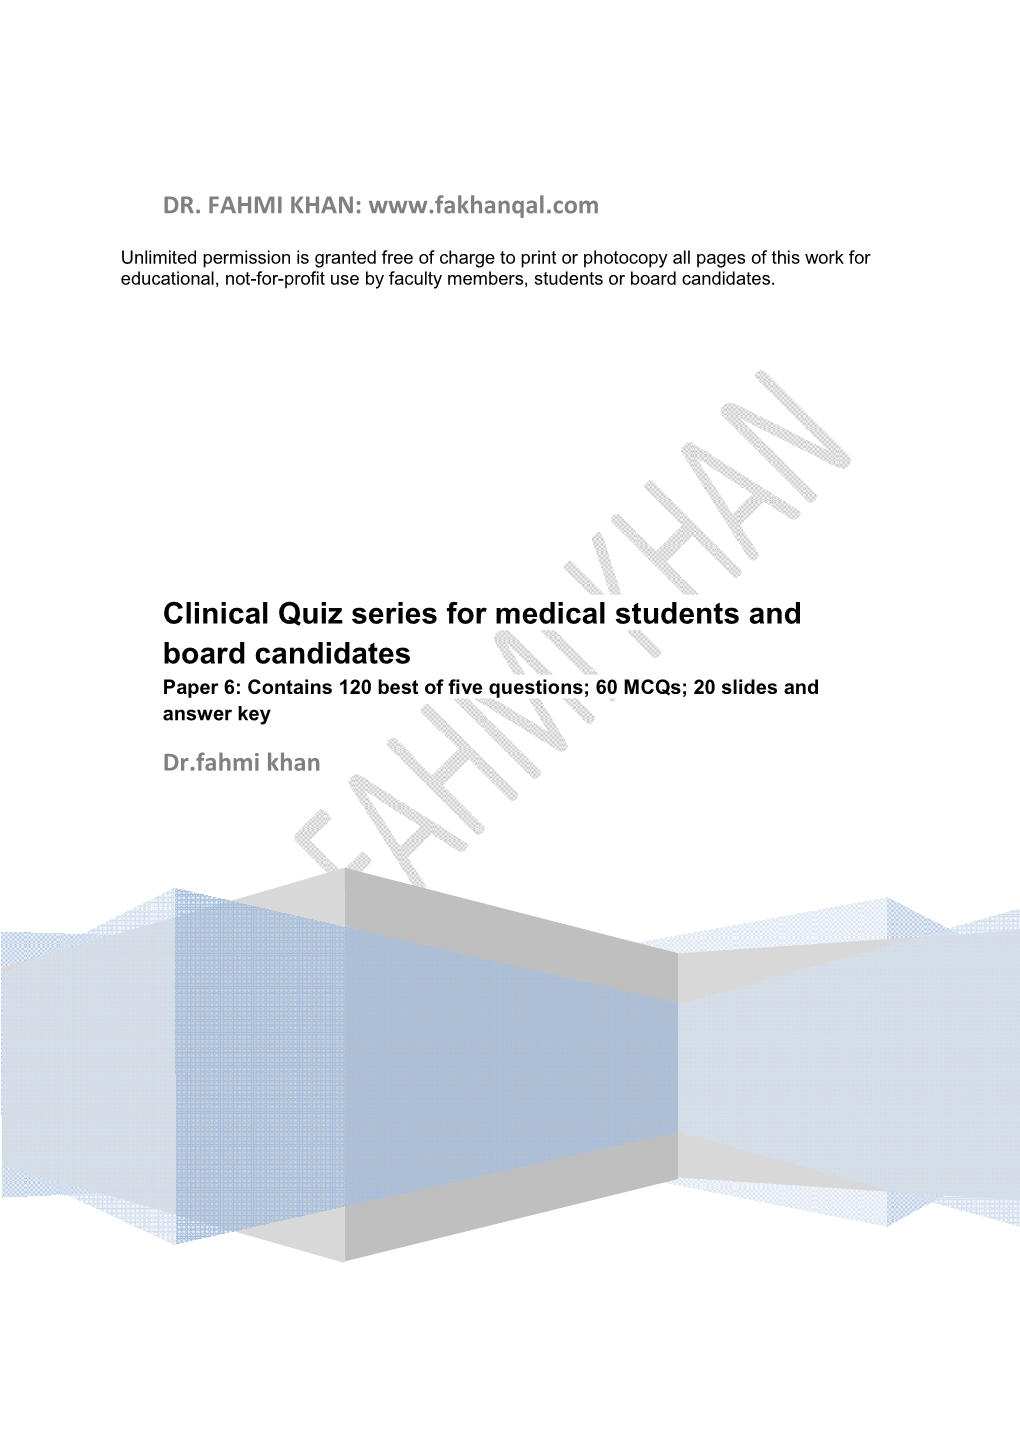 Clinical Quiz Series for Medical Students and Board Candidates Paper 6: Contains 120 Best of Five Questions; 60 Mcqs; 2 0 Slides and Answer Key Dr.Fahmi Khan